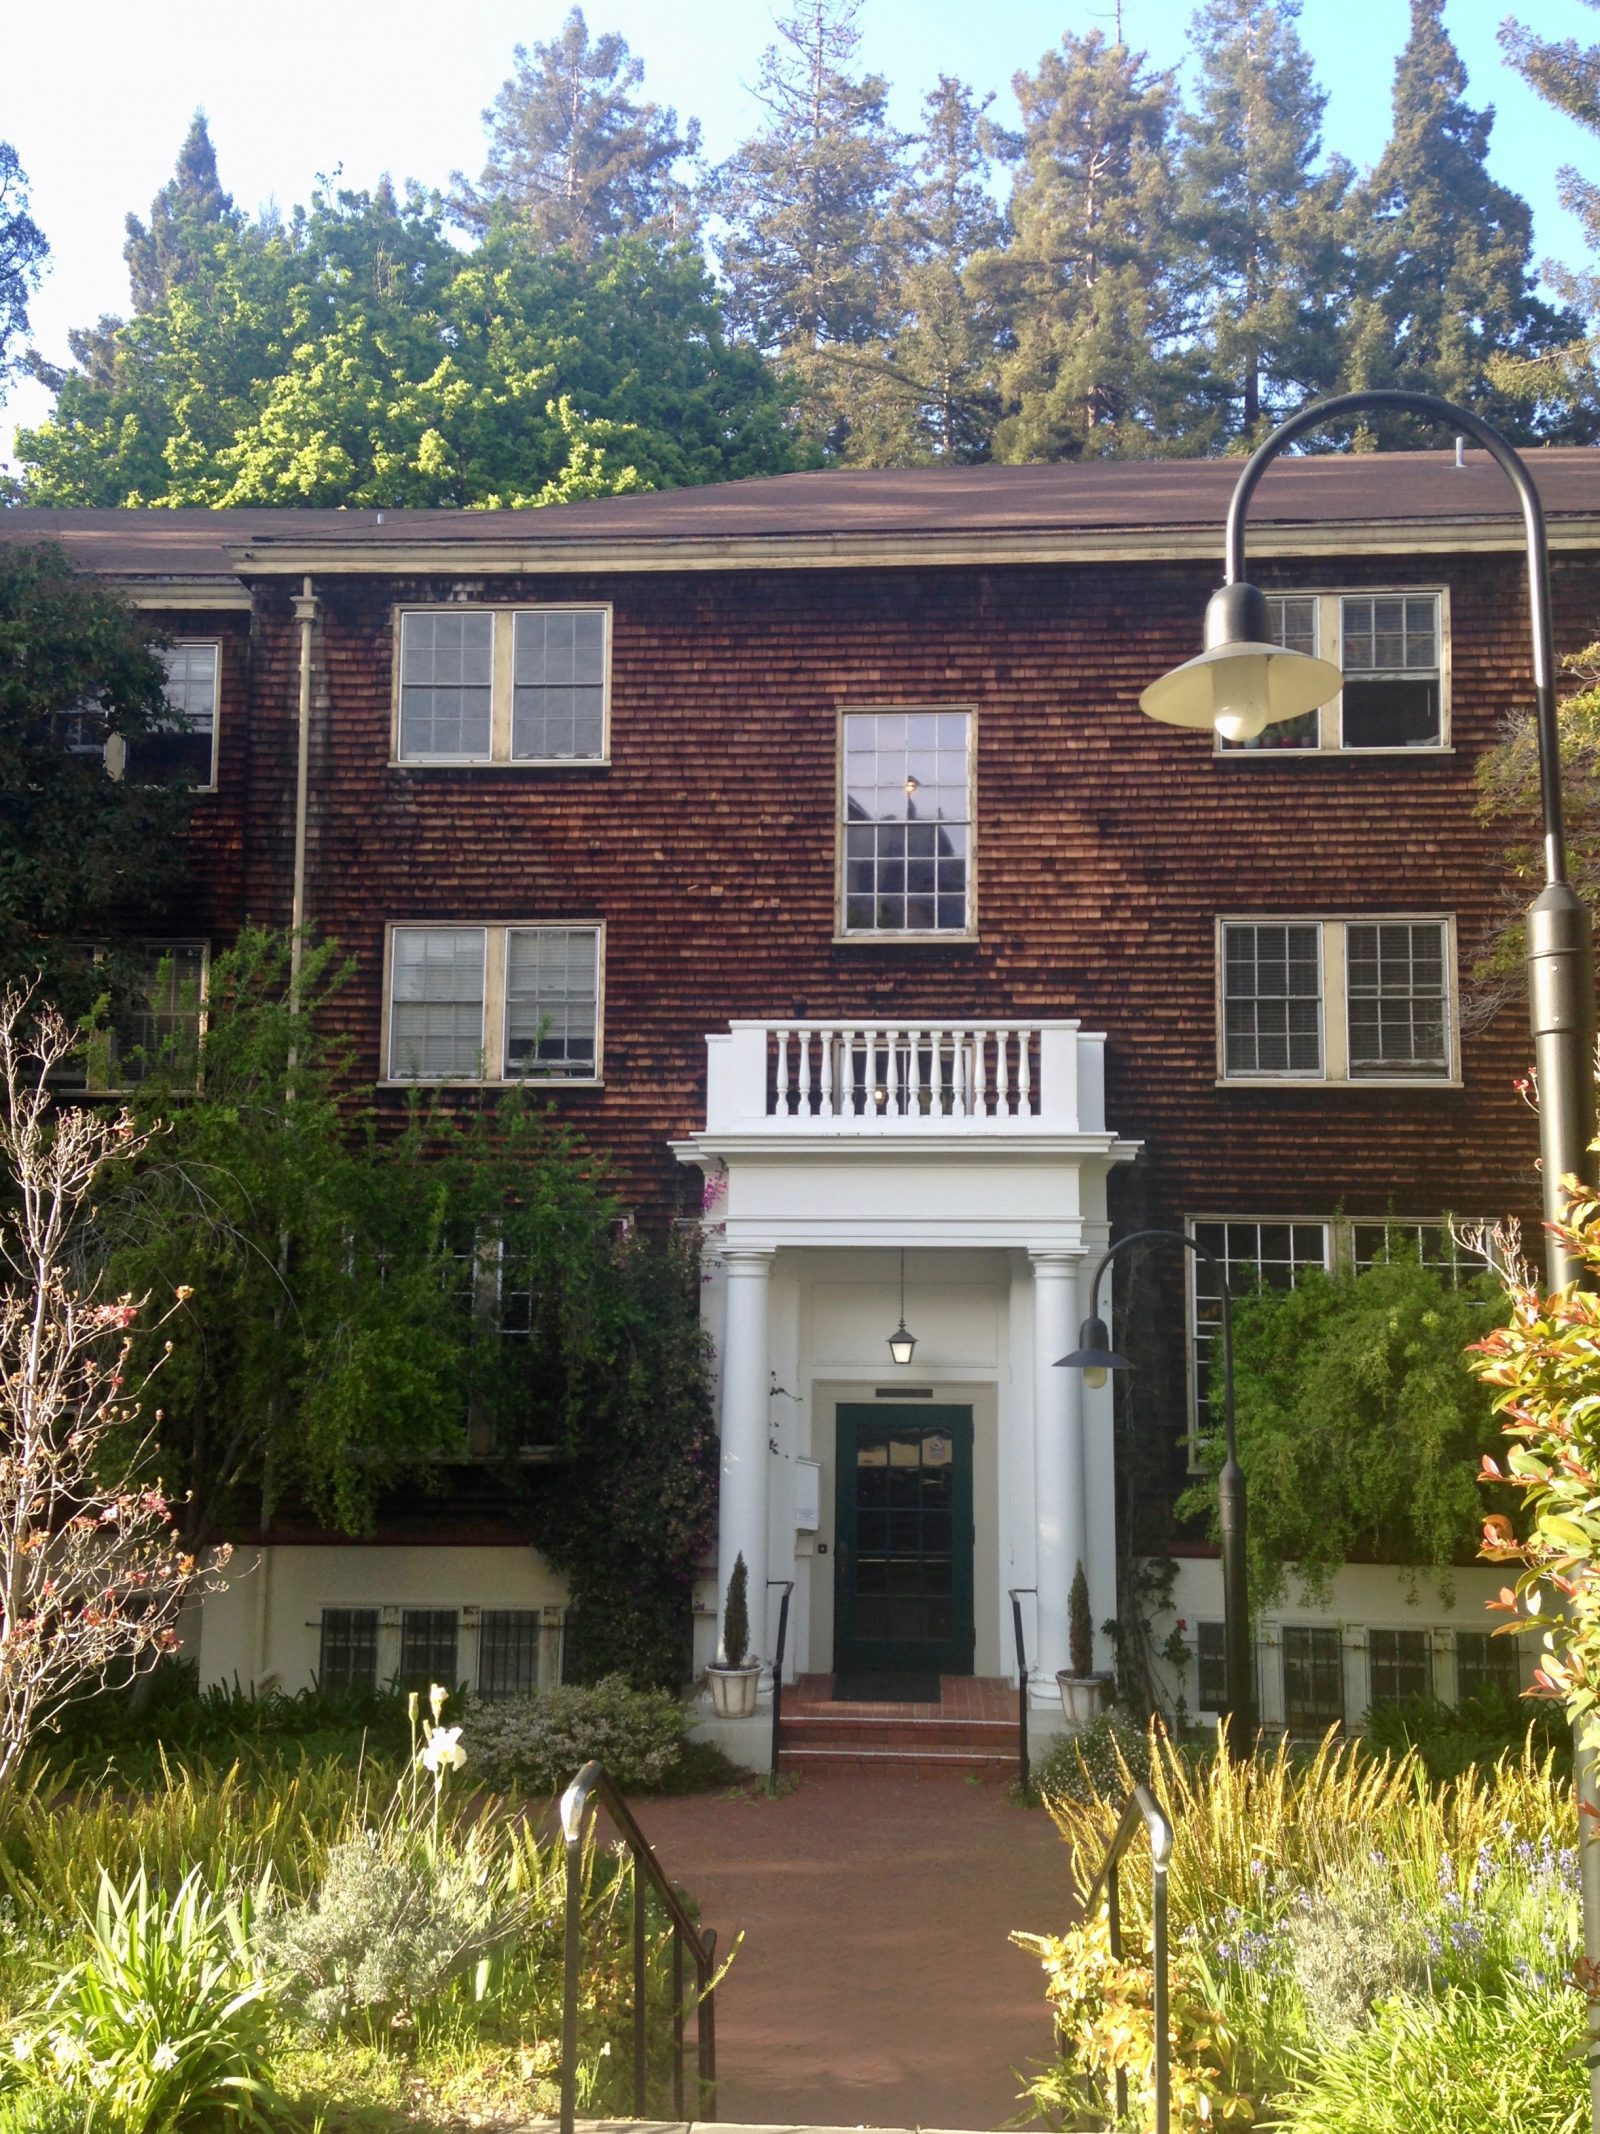 UC Berkeley’s Women’s Faculty Club Gets a New Roof of its Own*